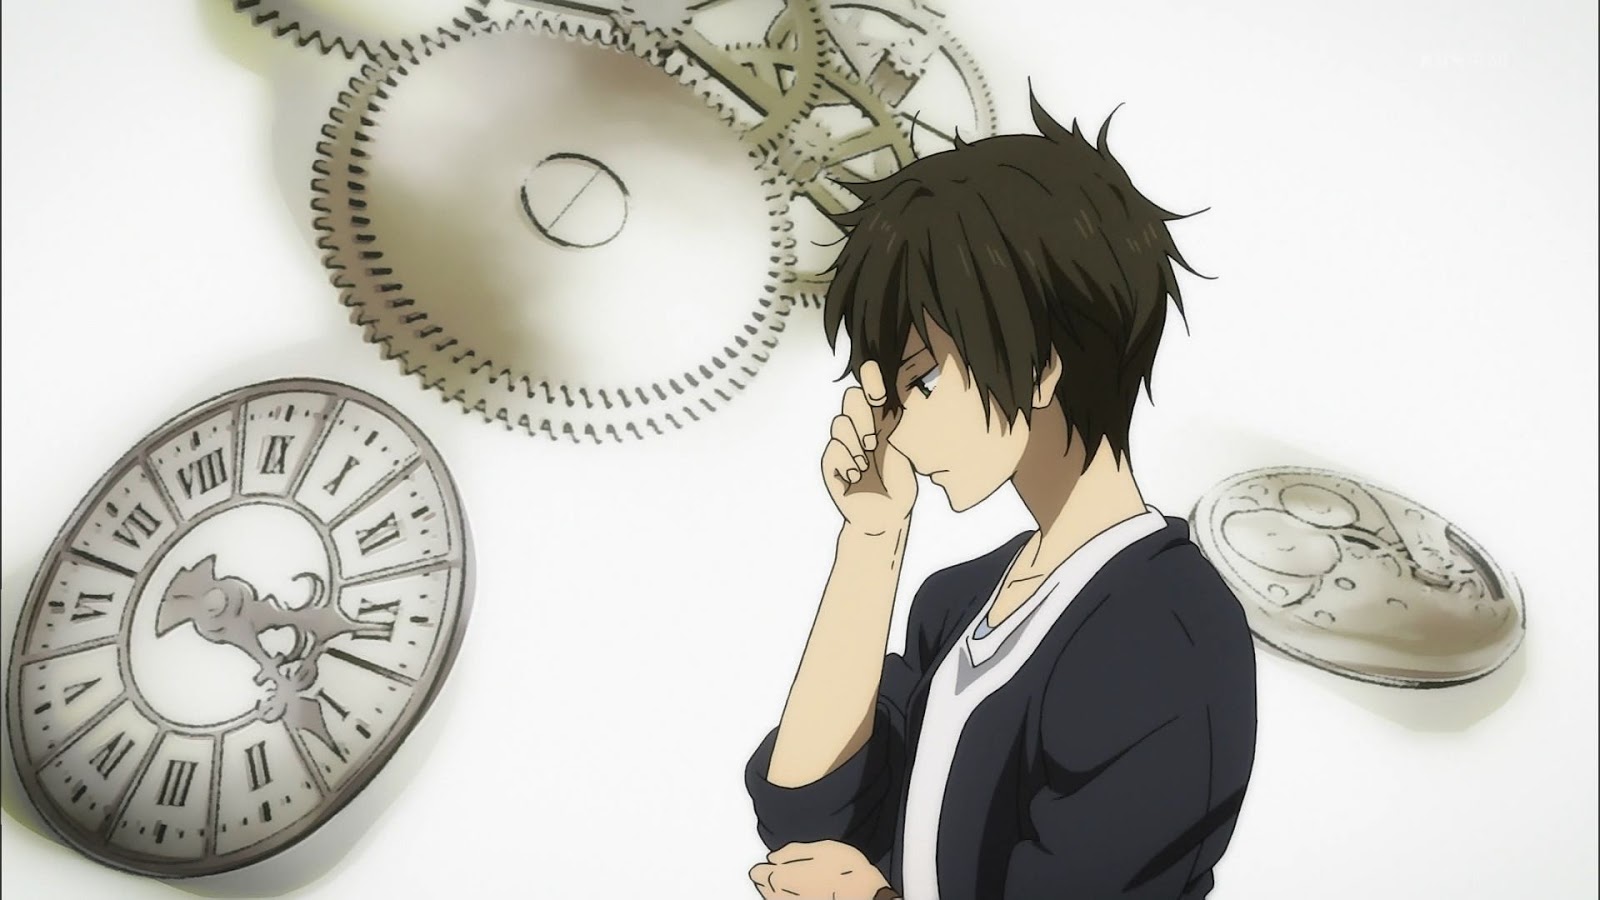 Oreki Houtarou pictures from Hyouka | Requested Anime pictures.